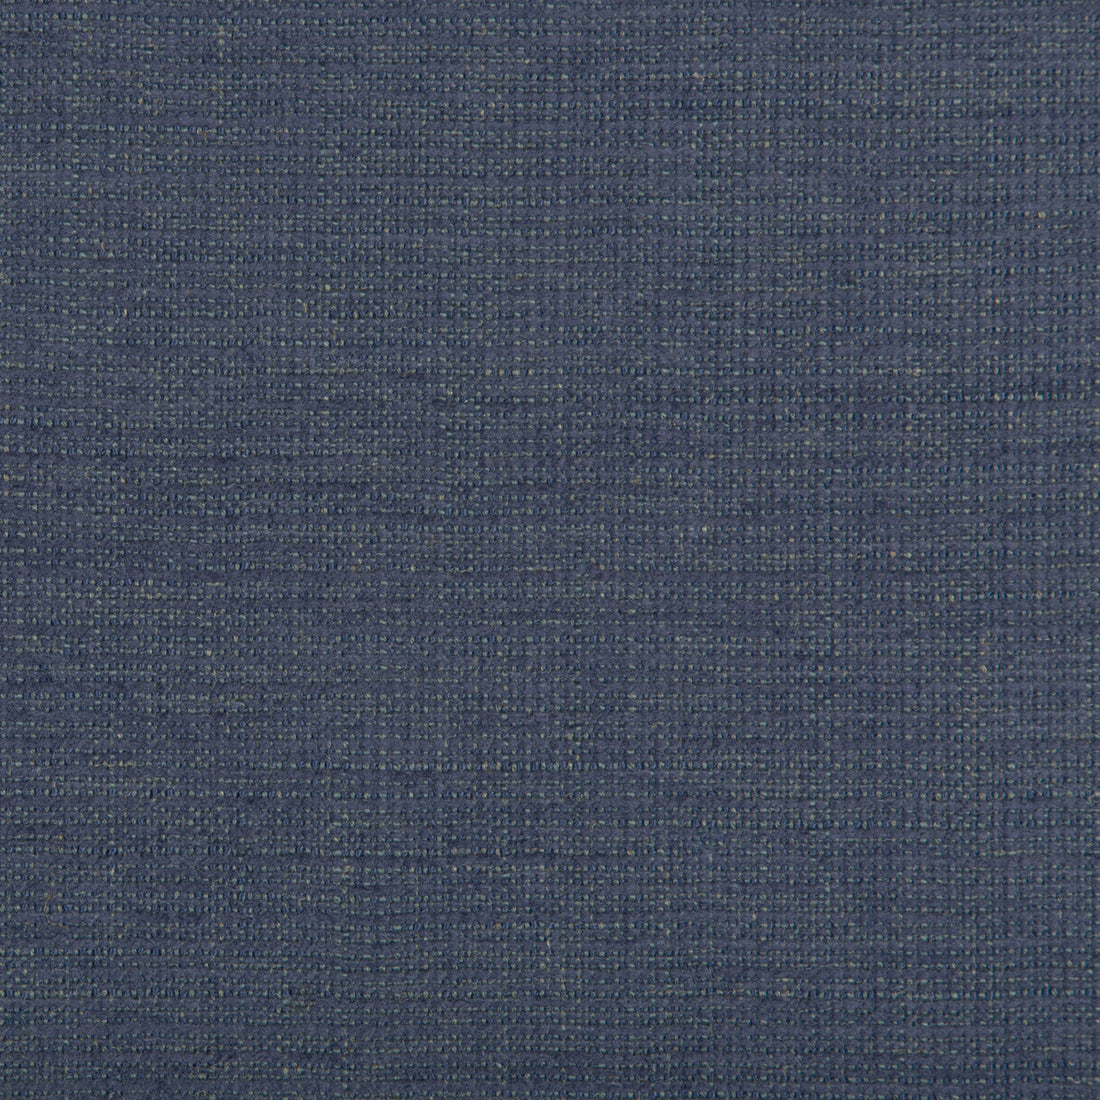 Kravet Smart fabric in 35395-5 color - pattern 35395.5.0 - by Kravet Smart in the Performance Crypton Home collection